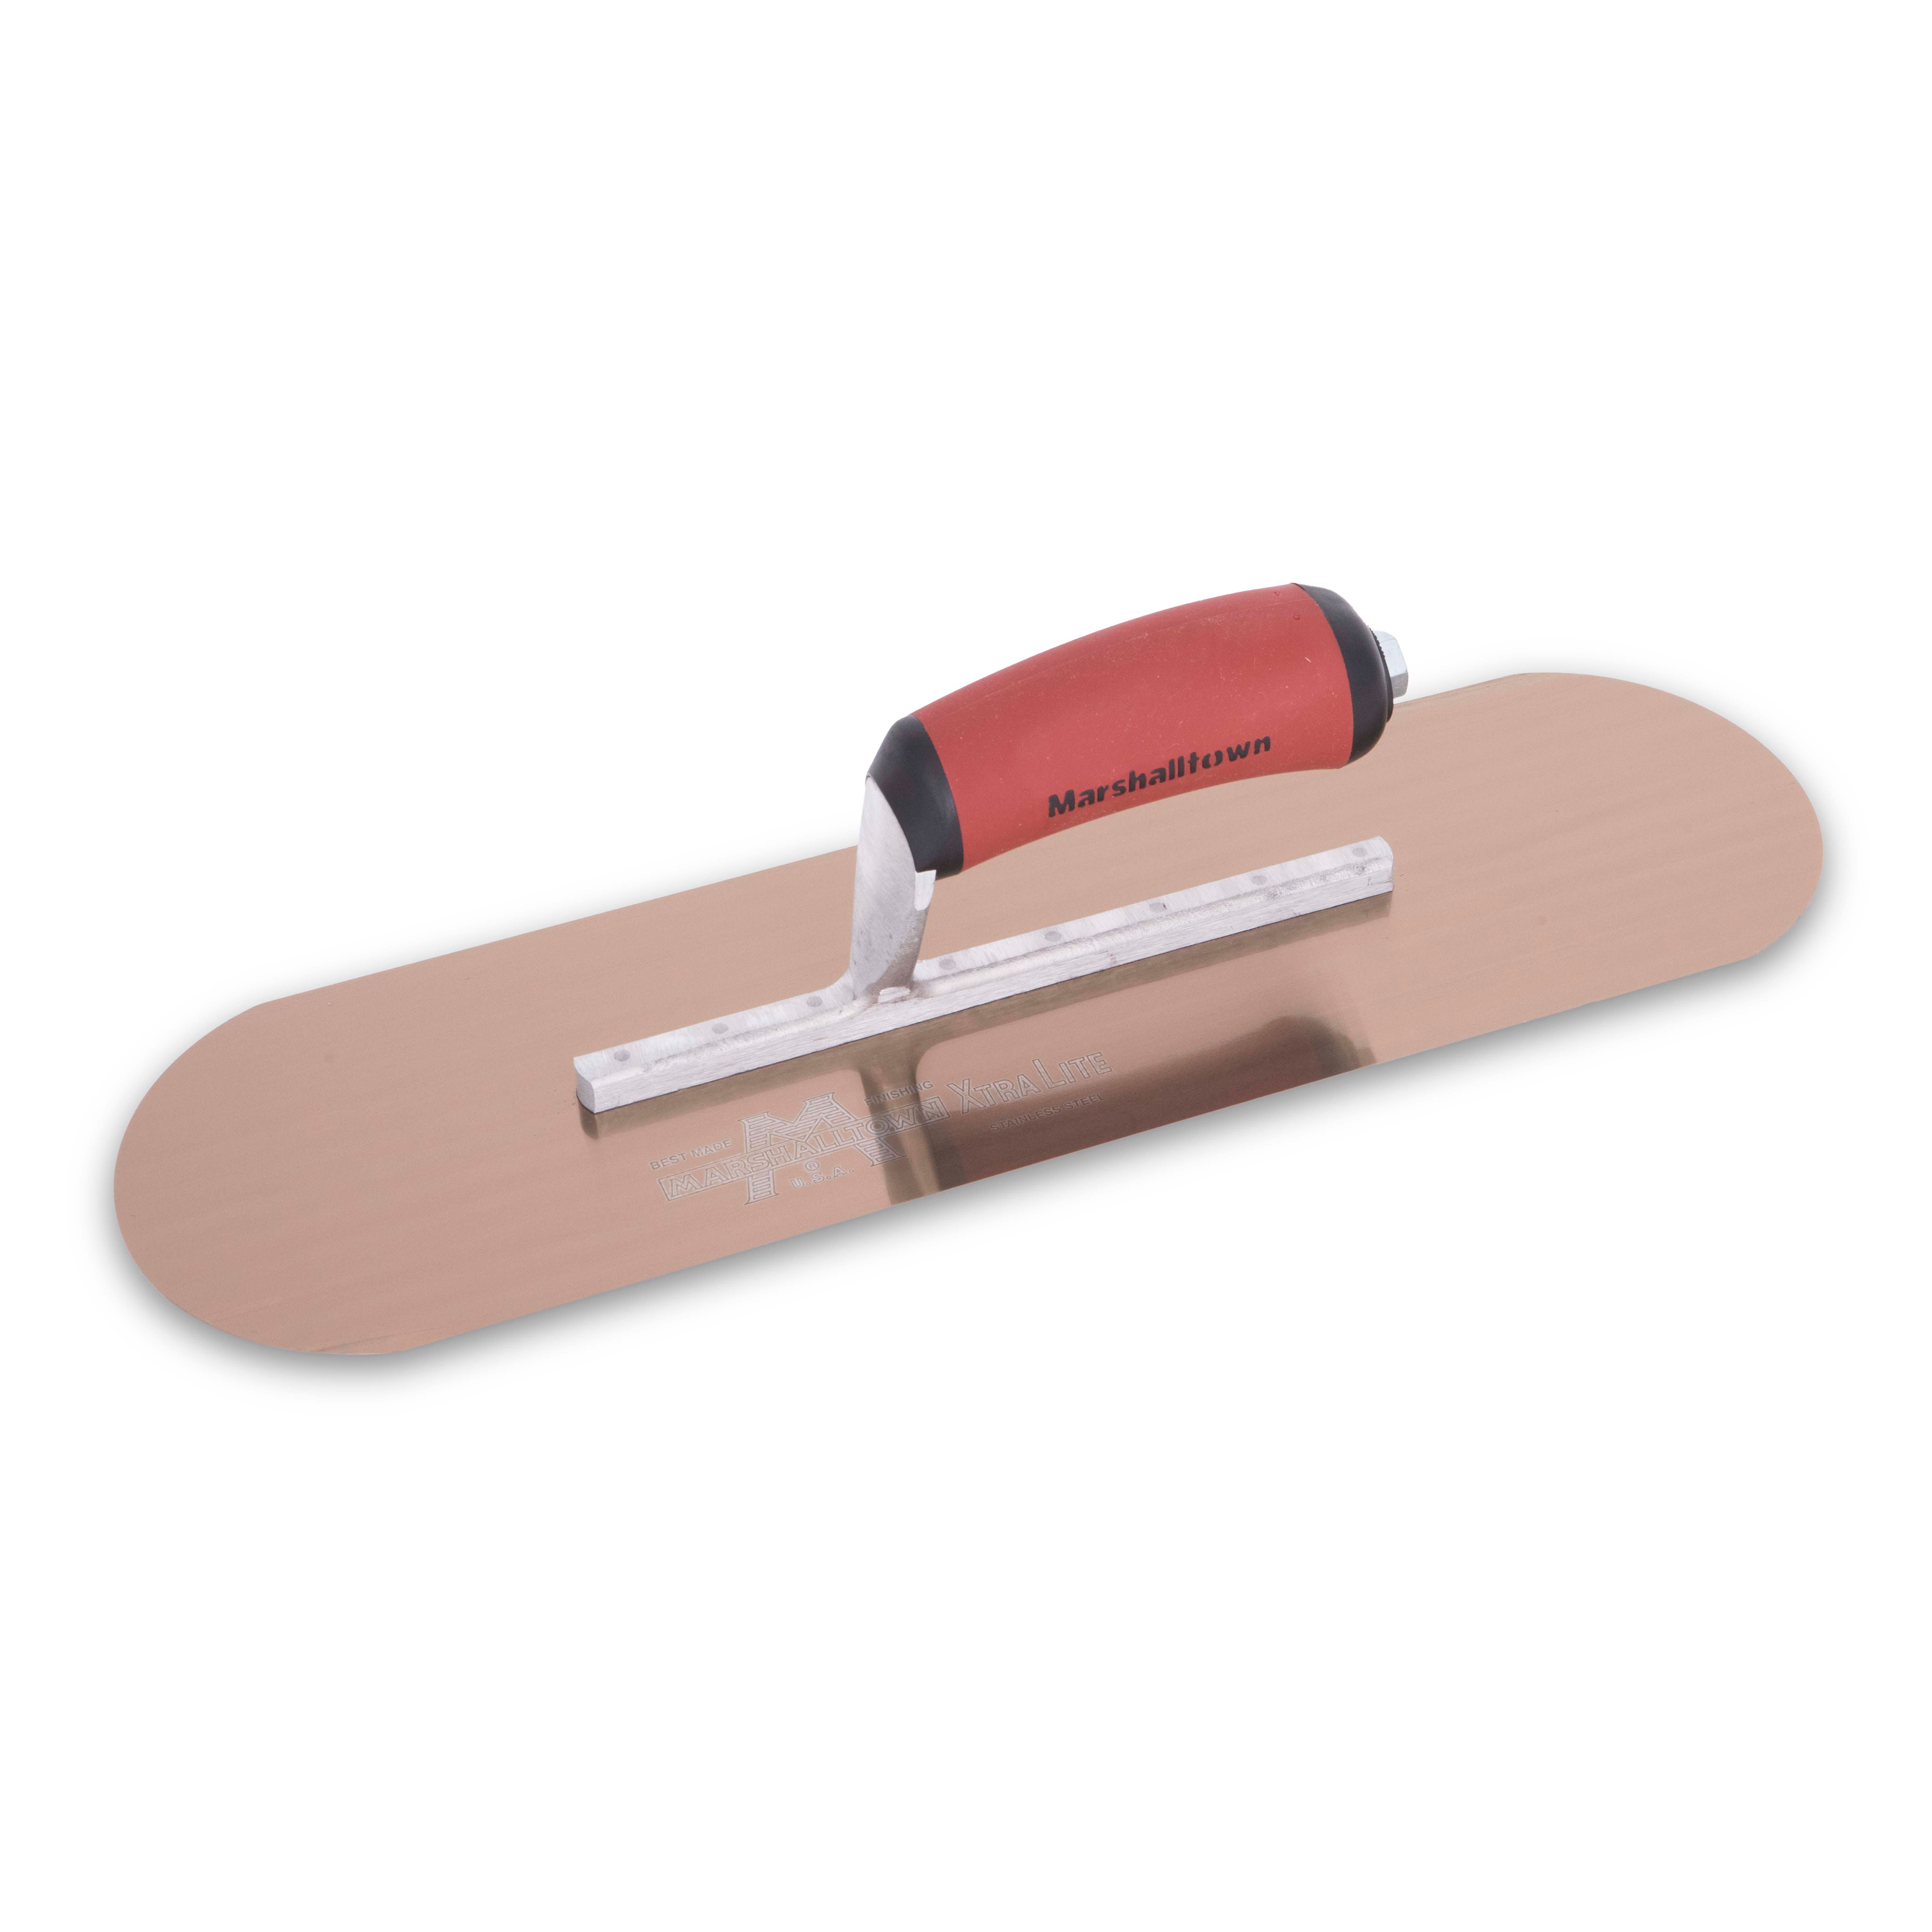 Marshalltown SP16GSD 16in x 4-1/2in Golden Stainless Steel Pool Trowel with DuraSoft Handle SP16GSD